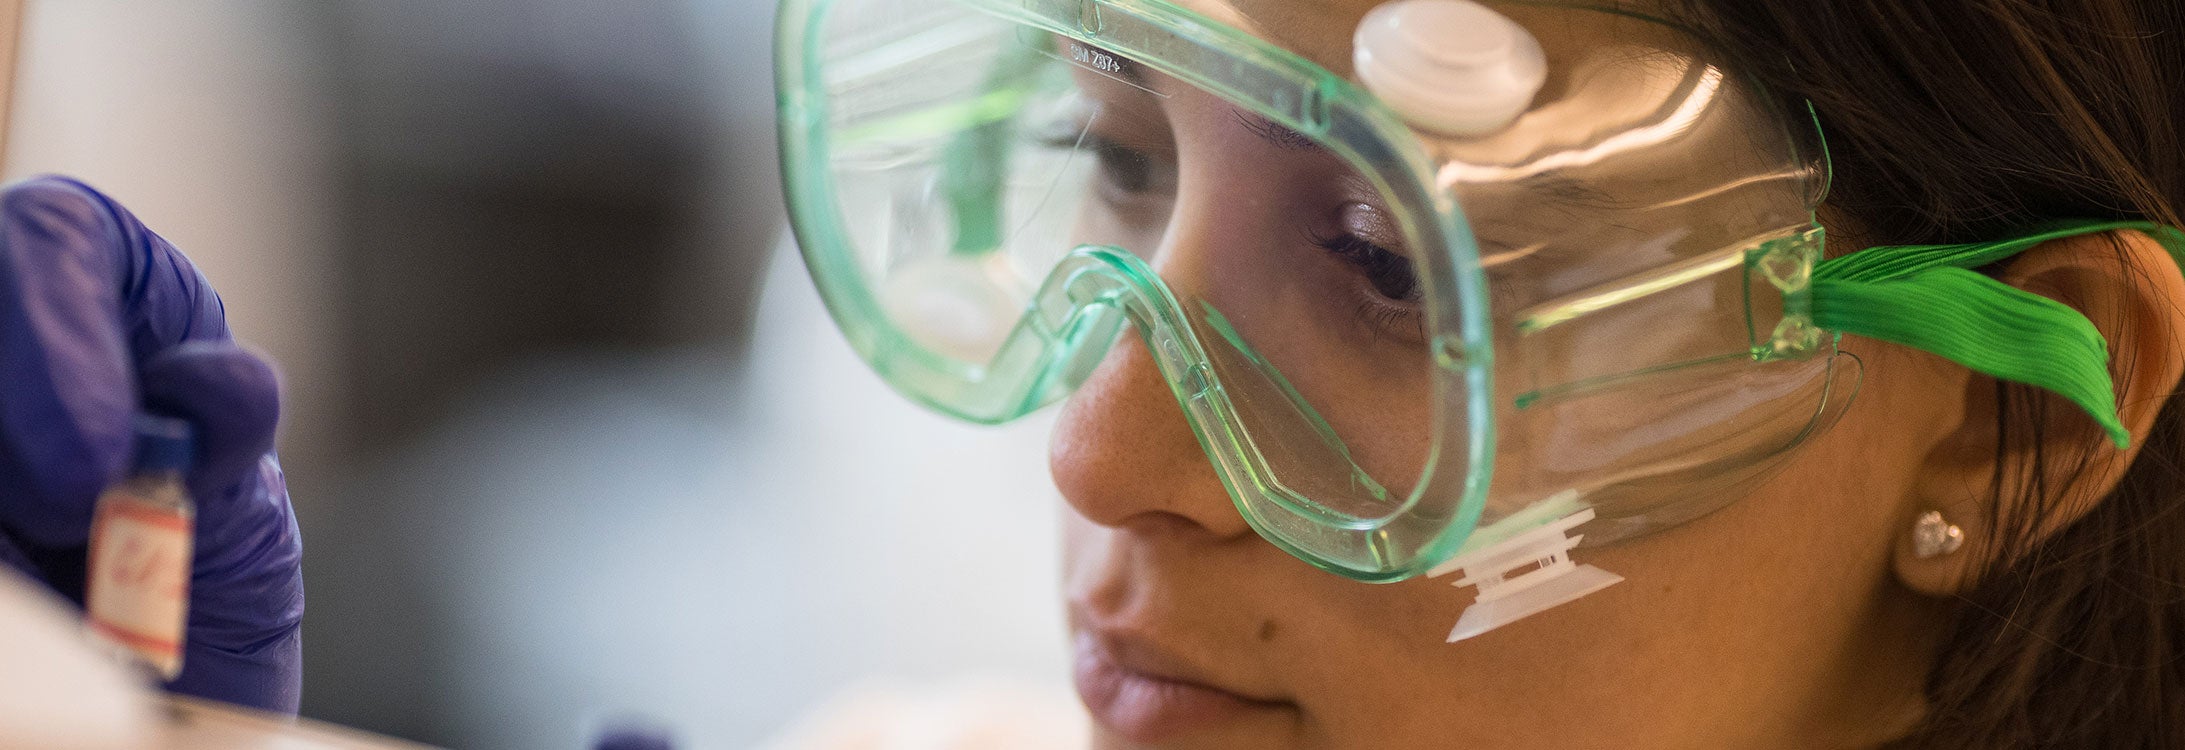 A close-up image of a scietist with green safety googles picking up a vial.